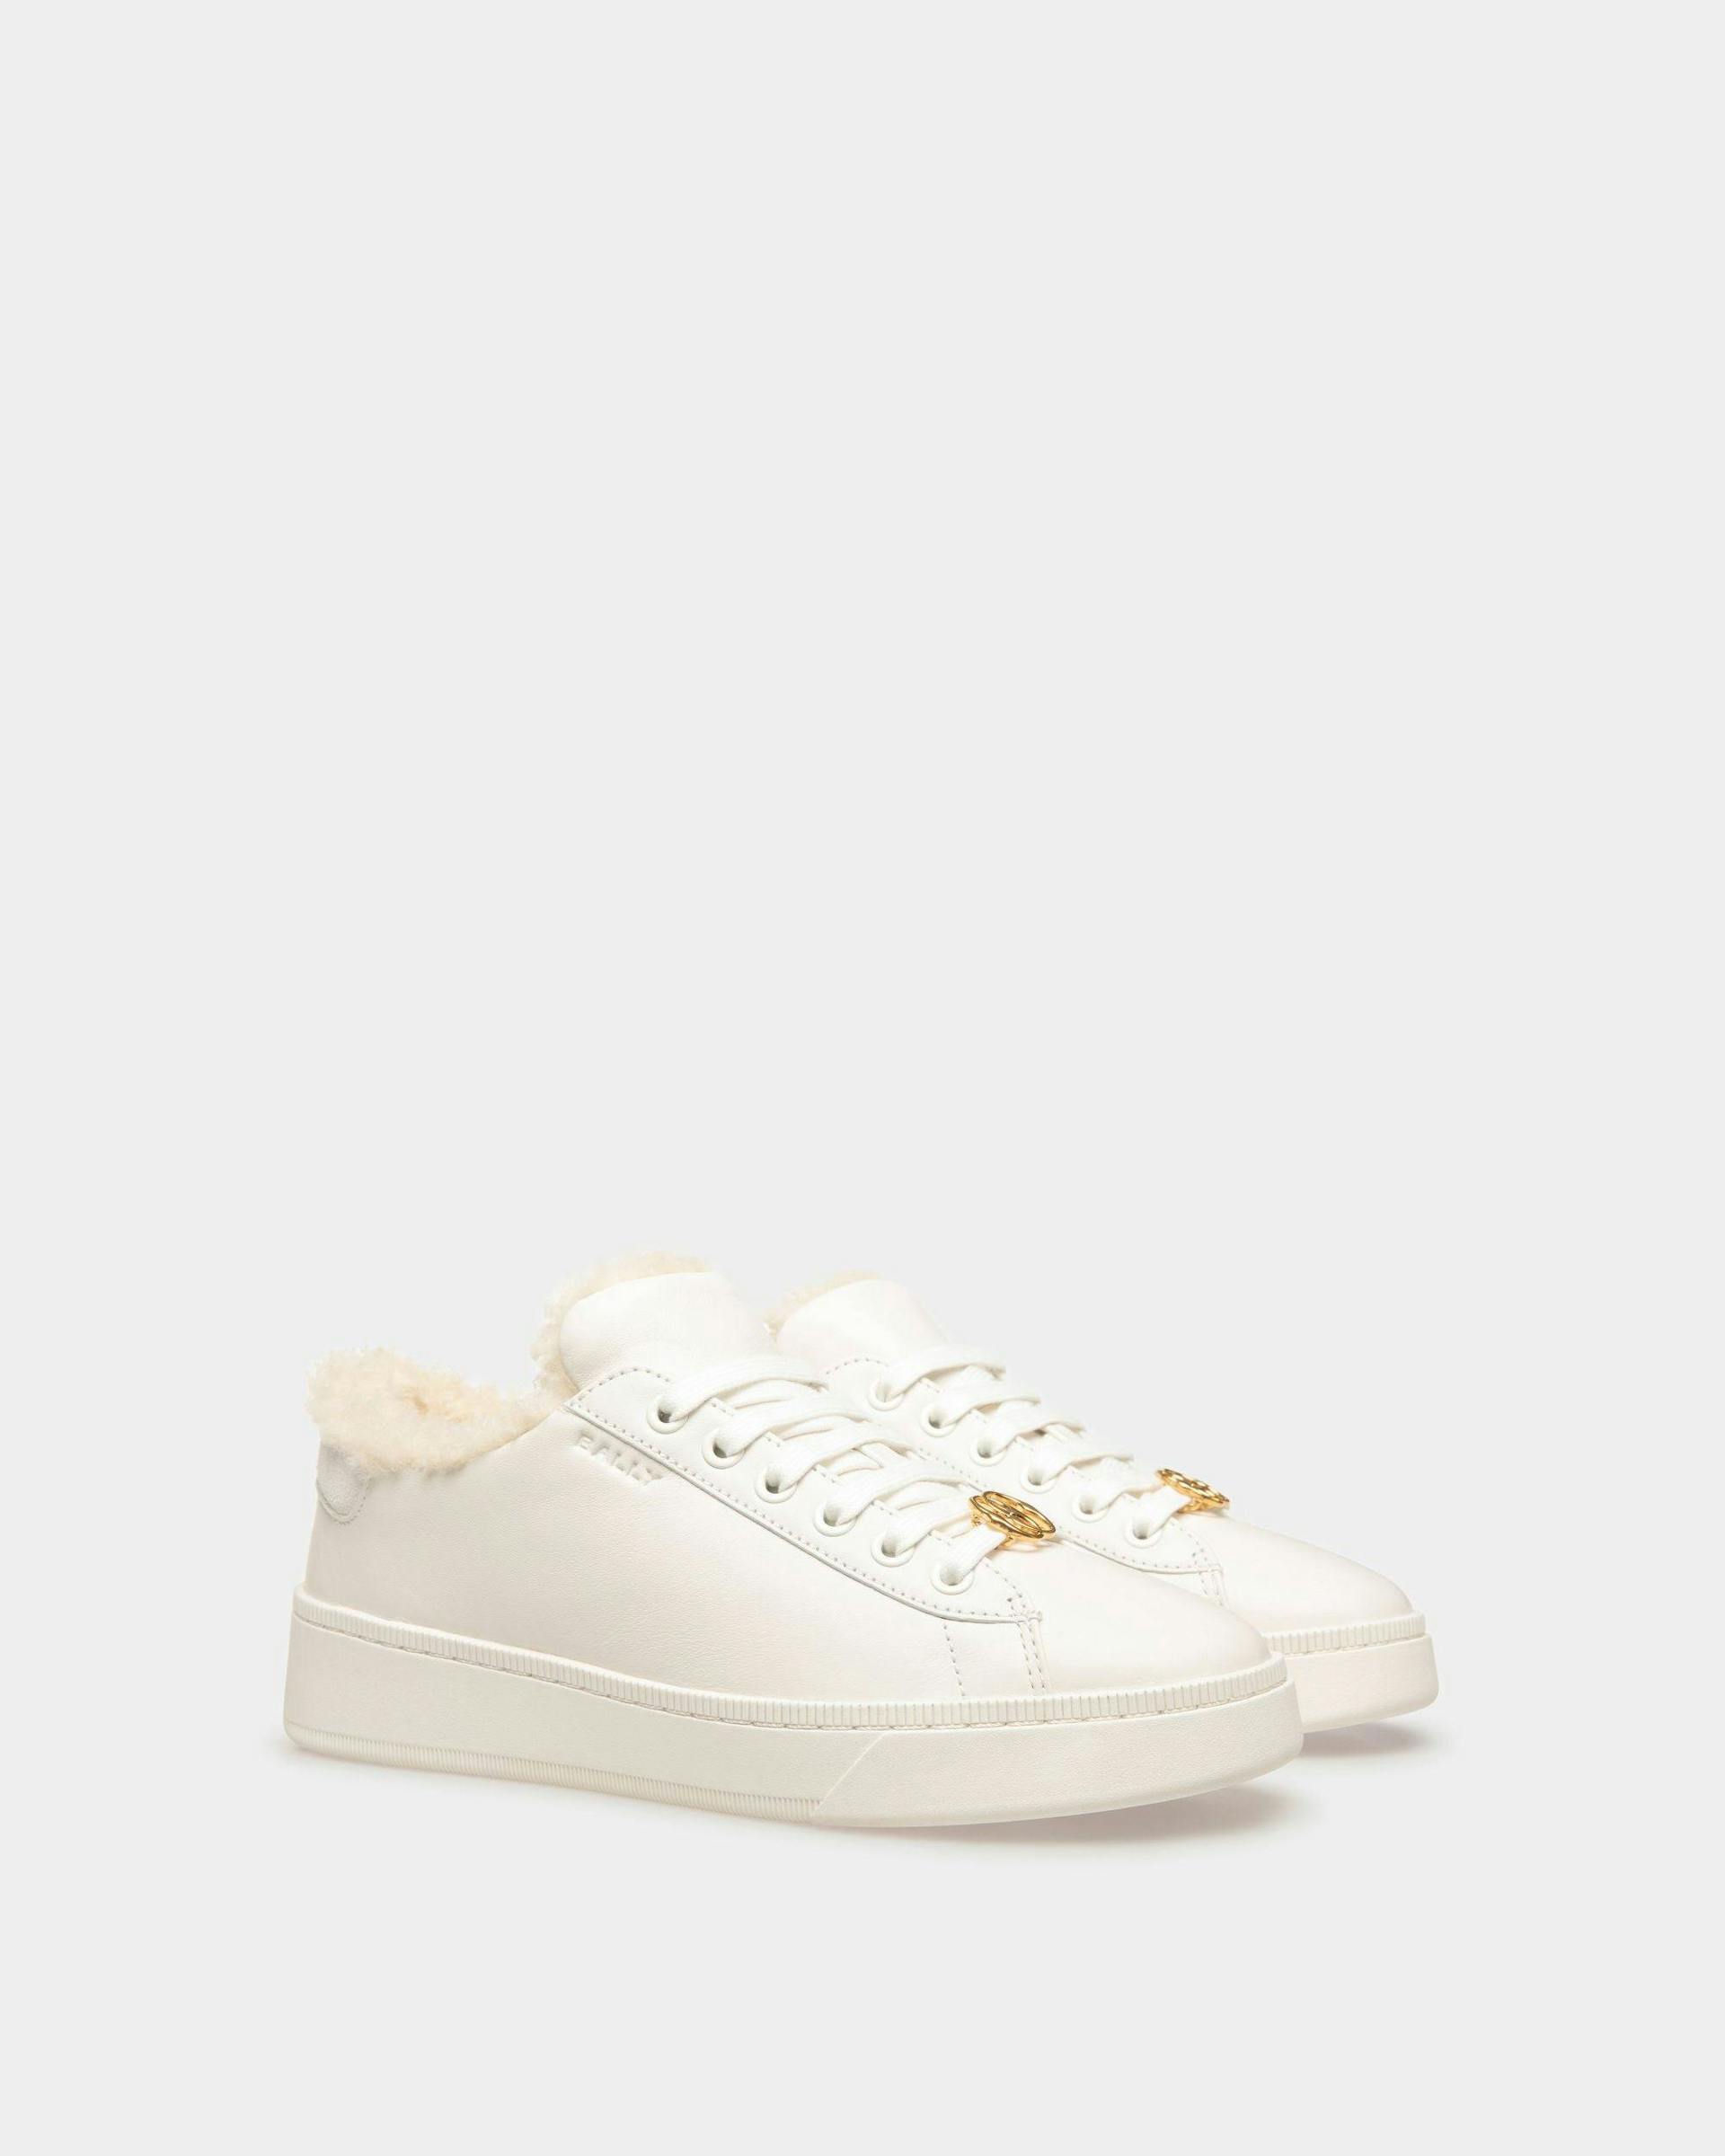 Women's Raise Sneakers In White Leather | Bally | Still Life 3/4 Front